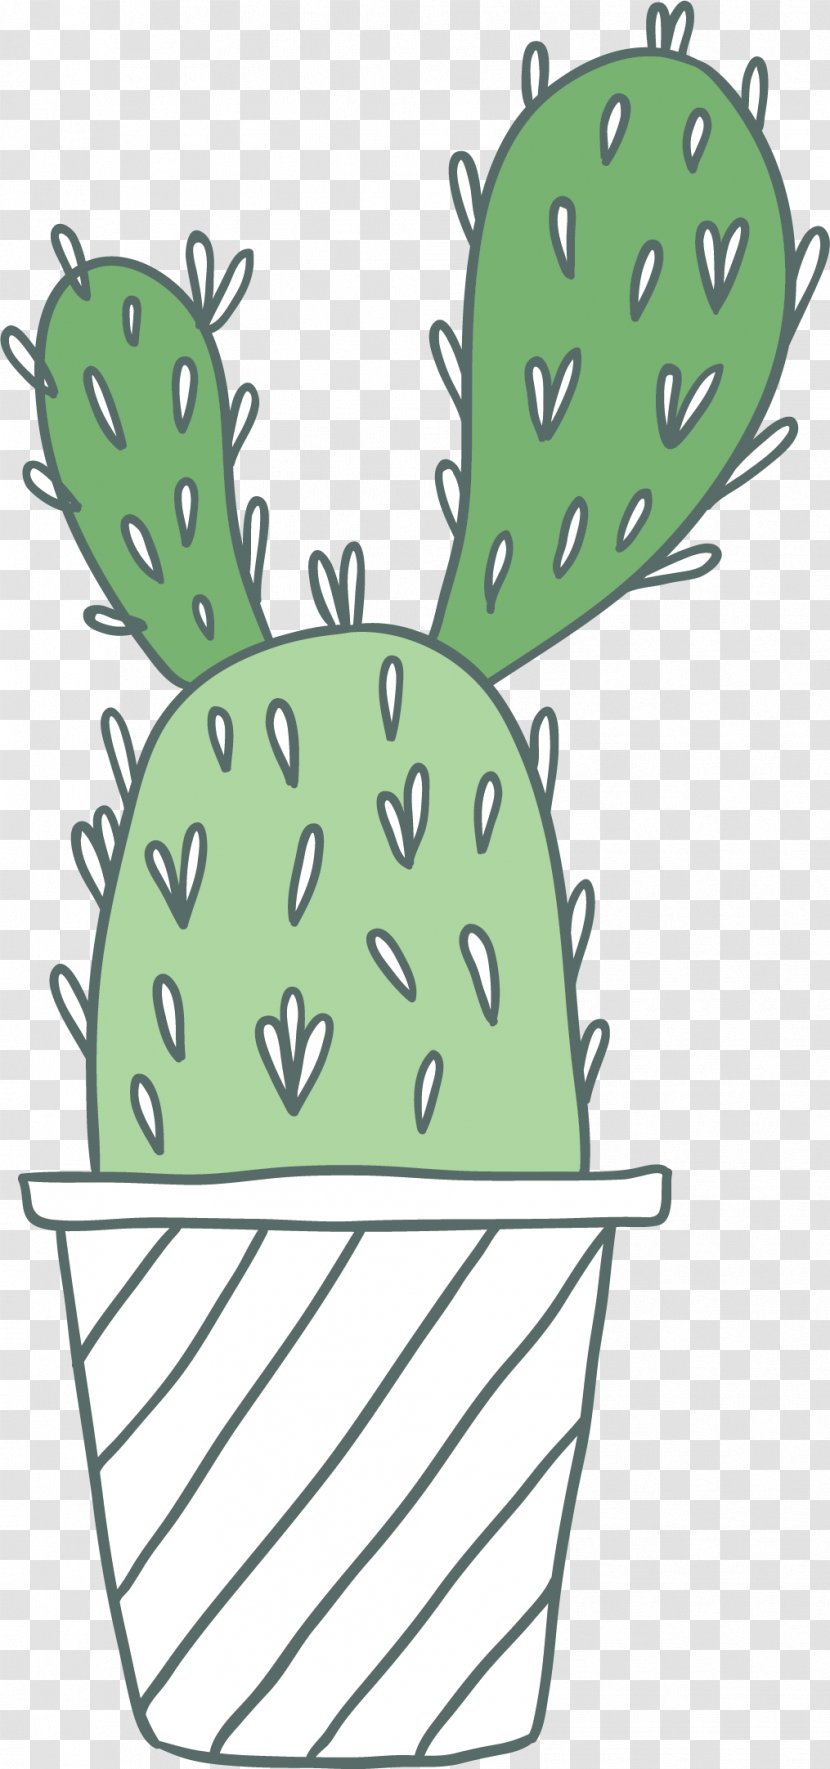 Cactaceae Clip Art - Photography - Vector Hand-painted Green Cactus Transparent PNG